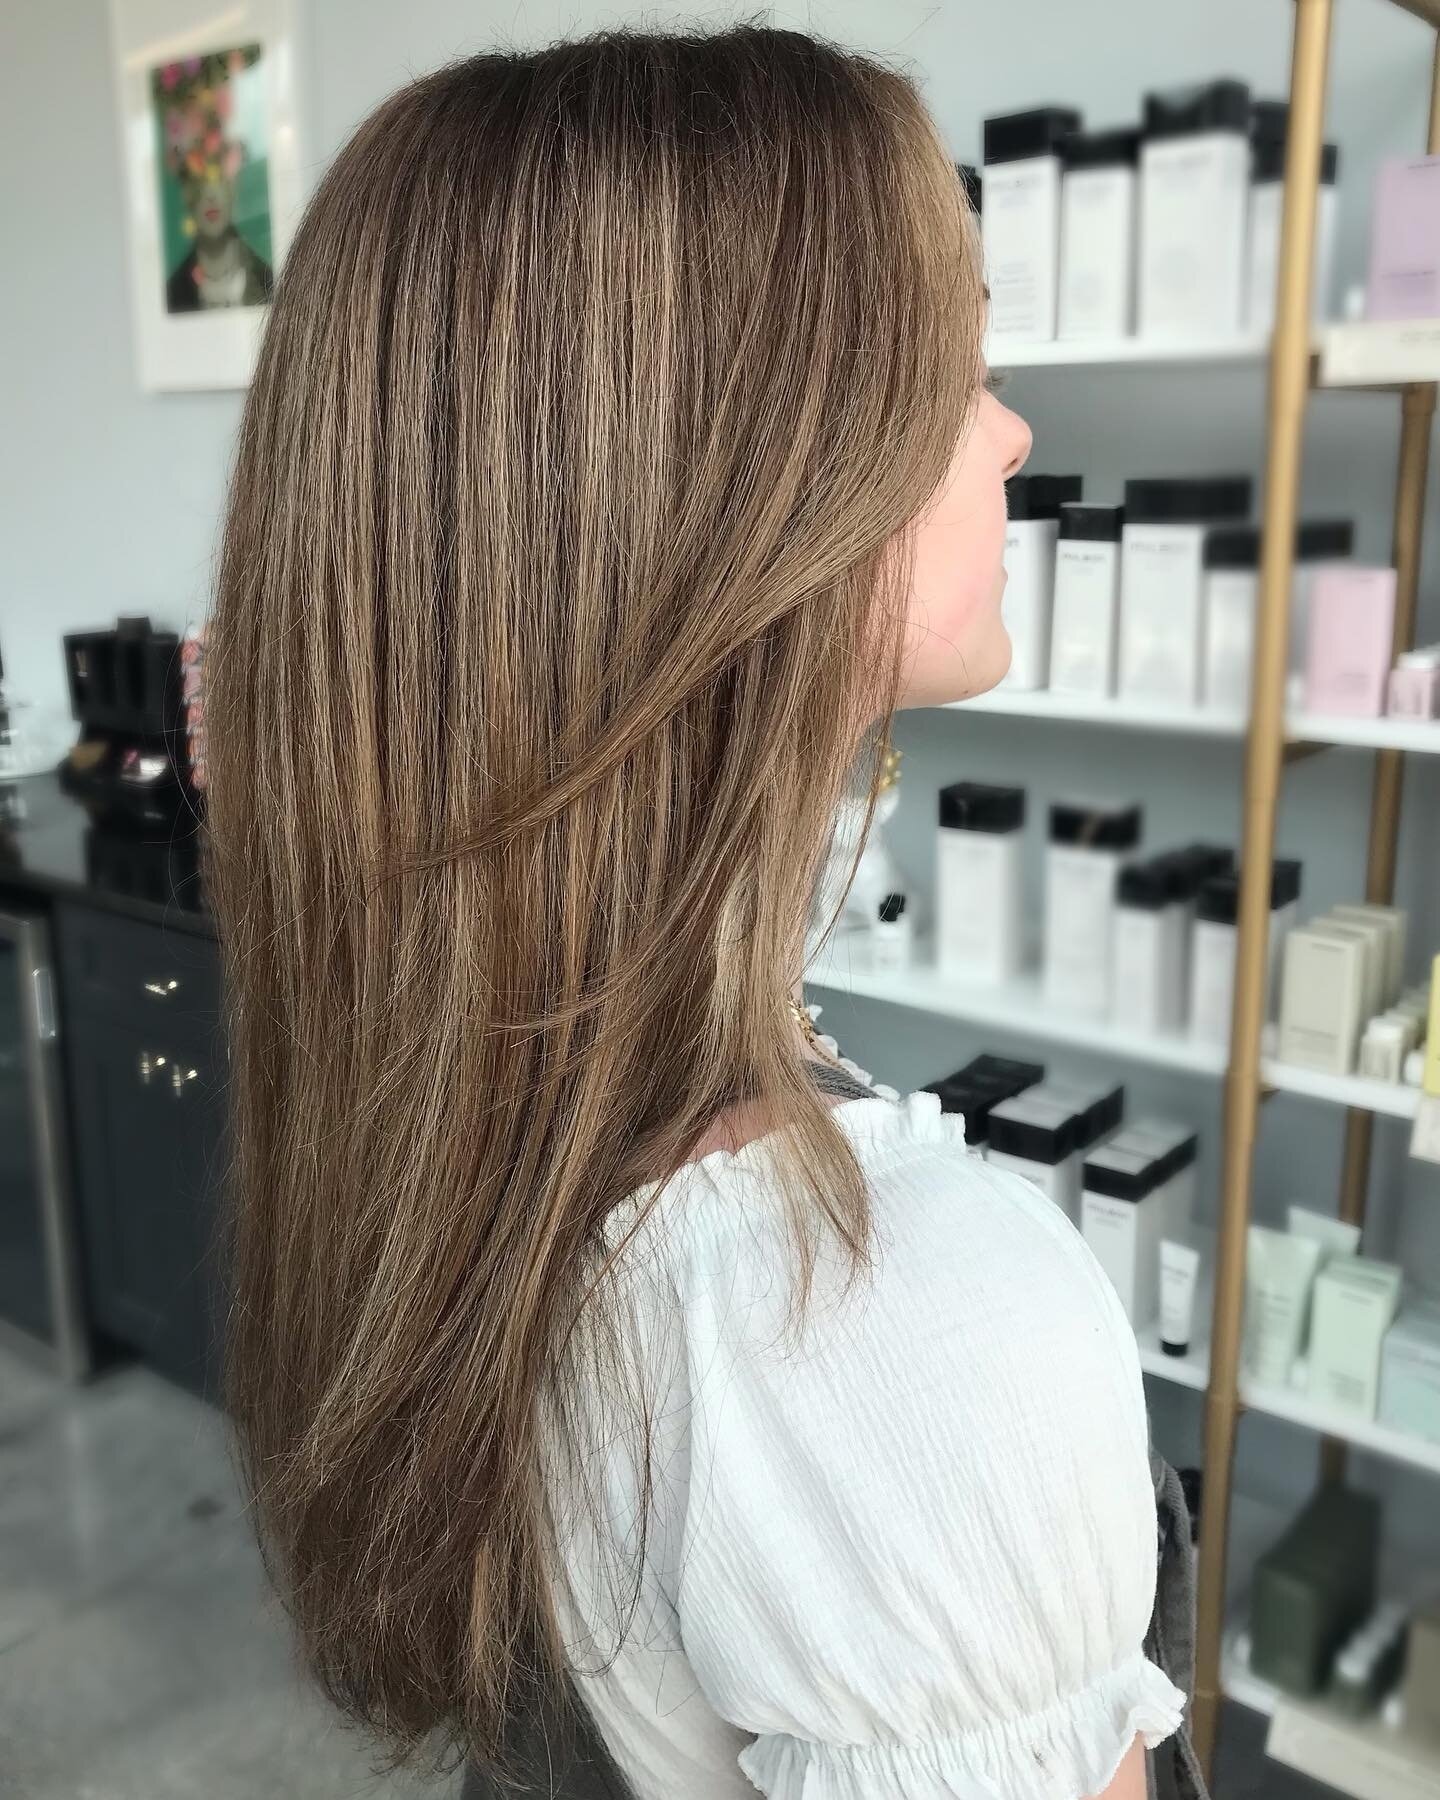 I had so much fun working on this technique, blending the warm caramel tones into the hair using the foilyage method. The result is a beautiful, sun-kissed look that's perfect for summer! I'm so grateful to have the opportunity to create beautiful ha